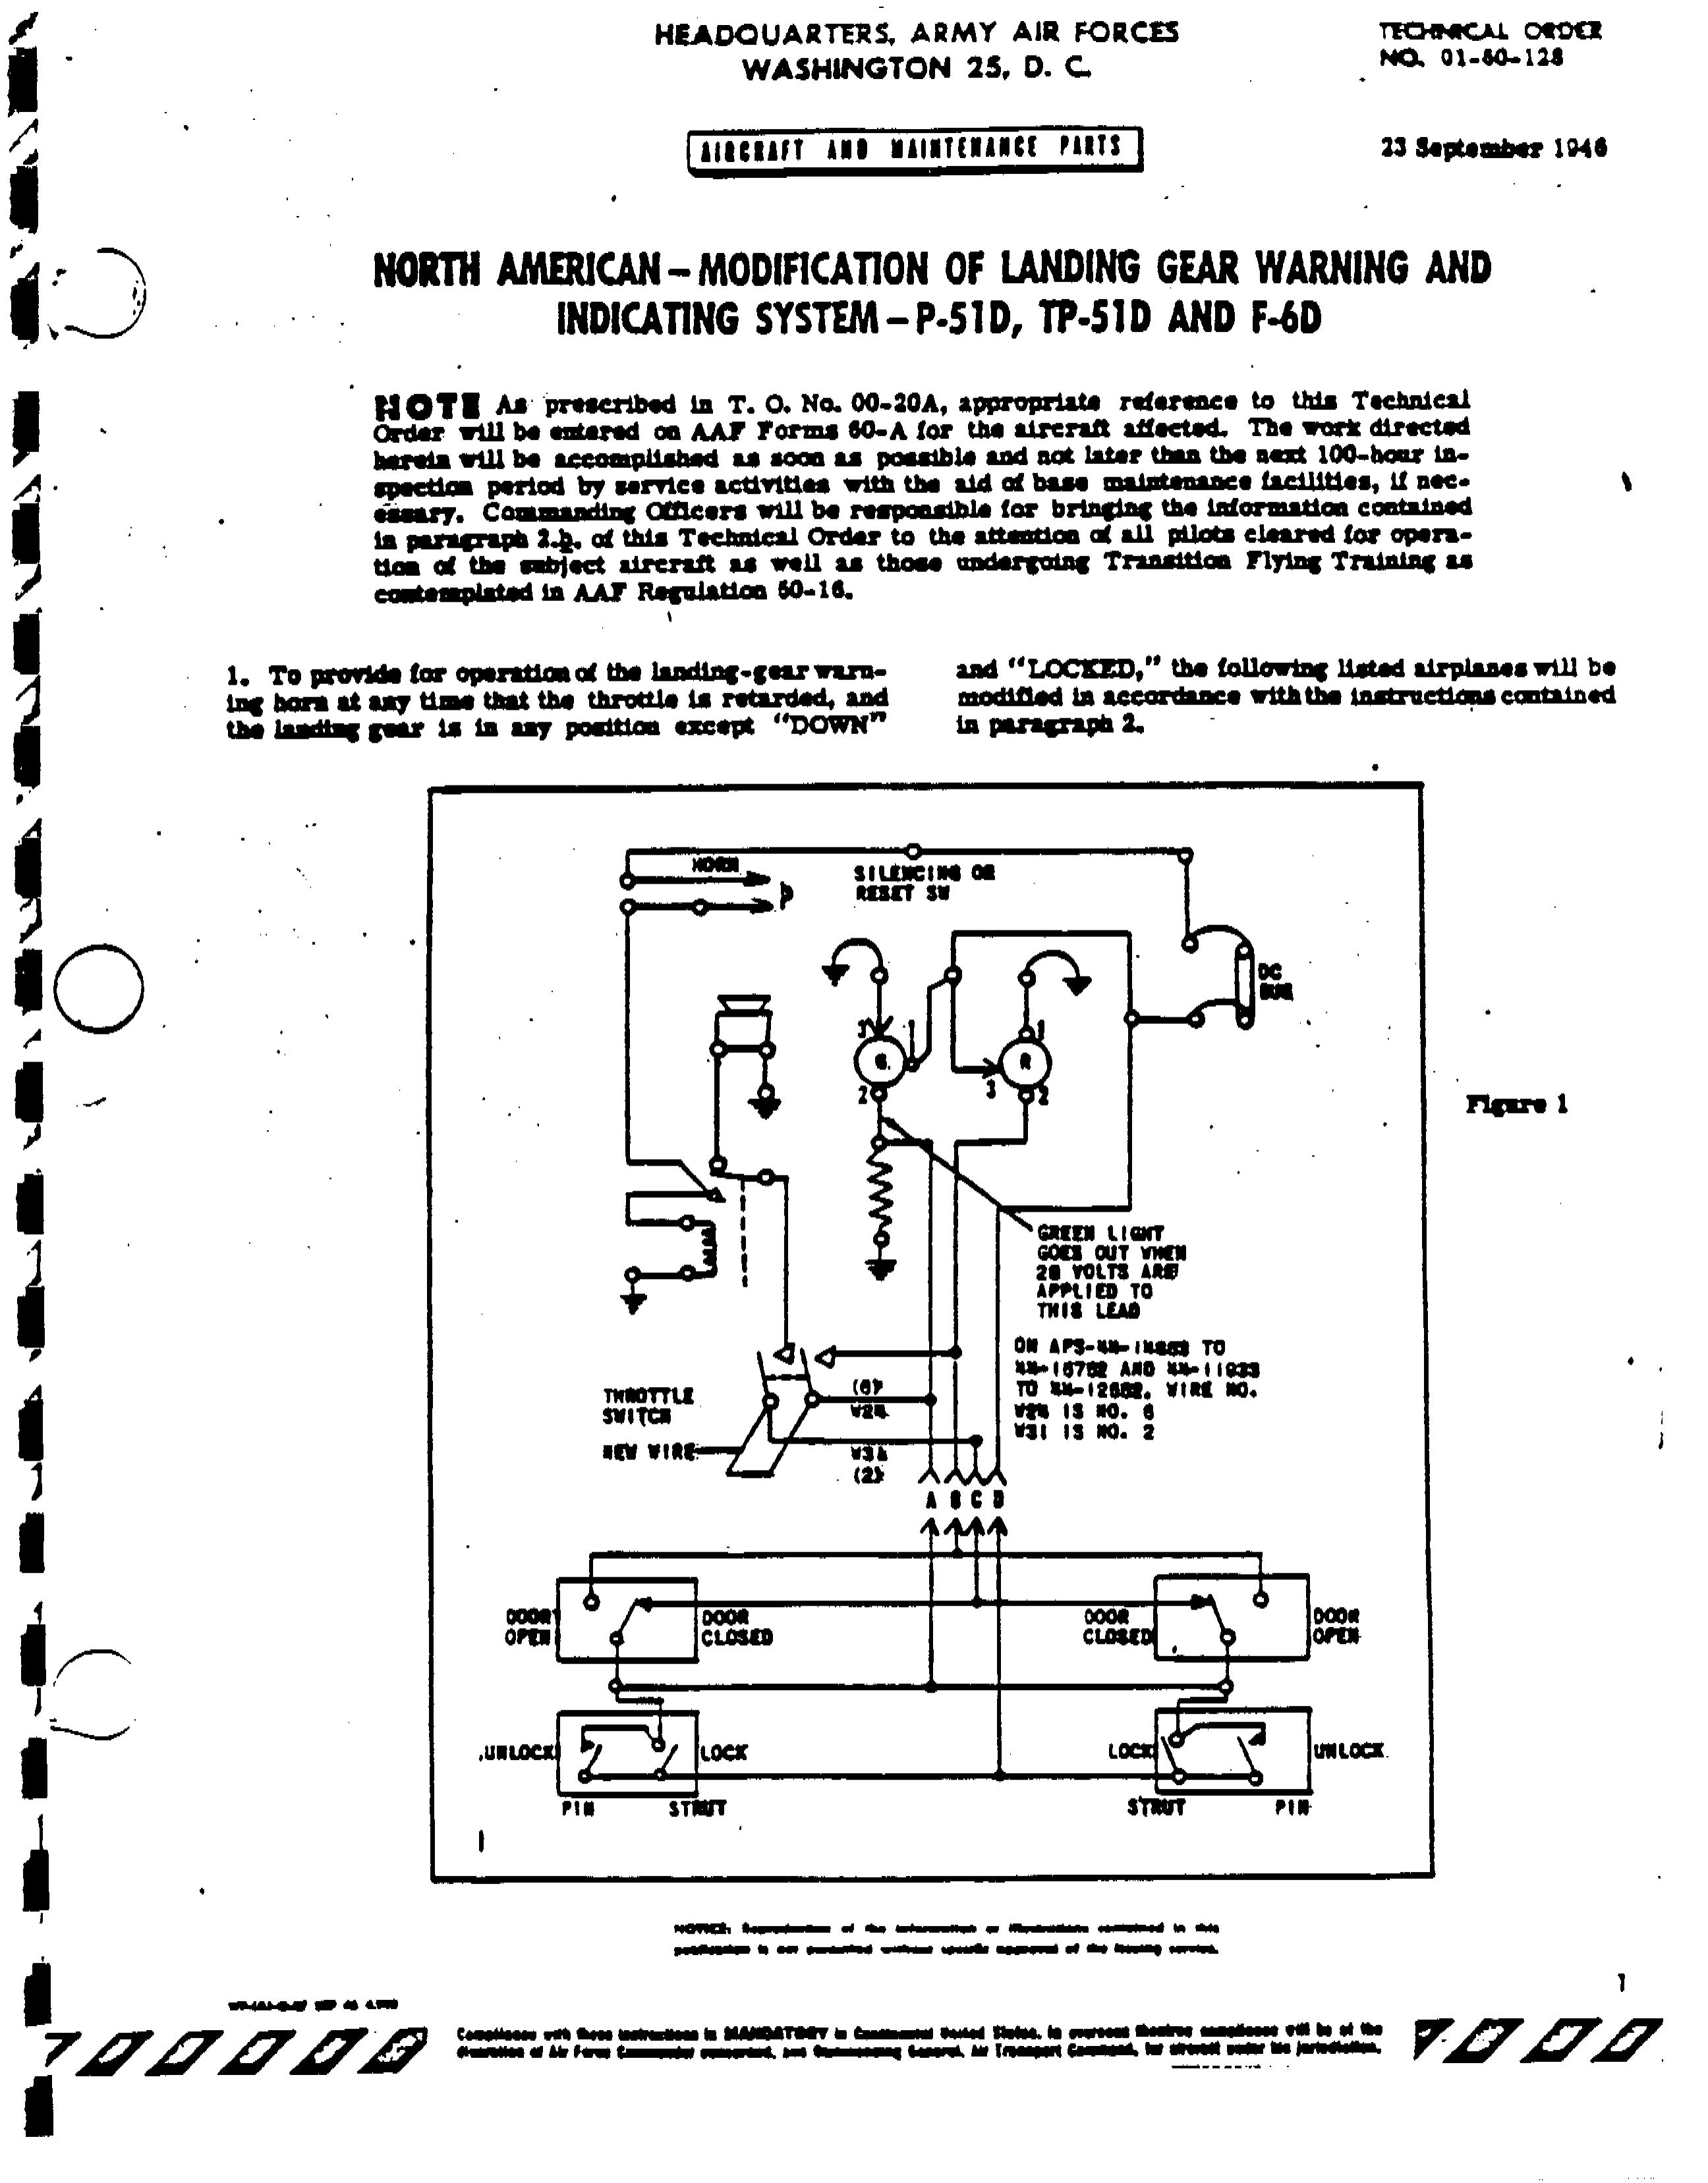 Sample page 1 from AirCorps Library document: Modification of Landing Gear Warning and Indicating System